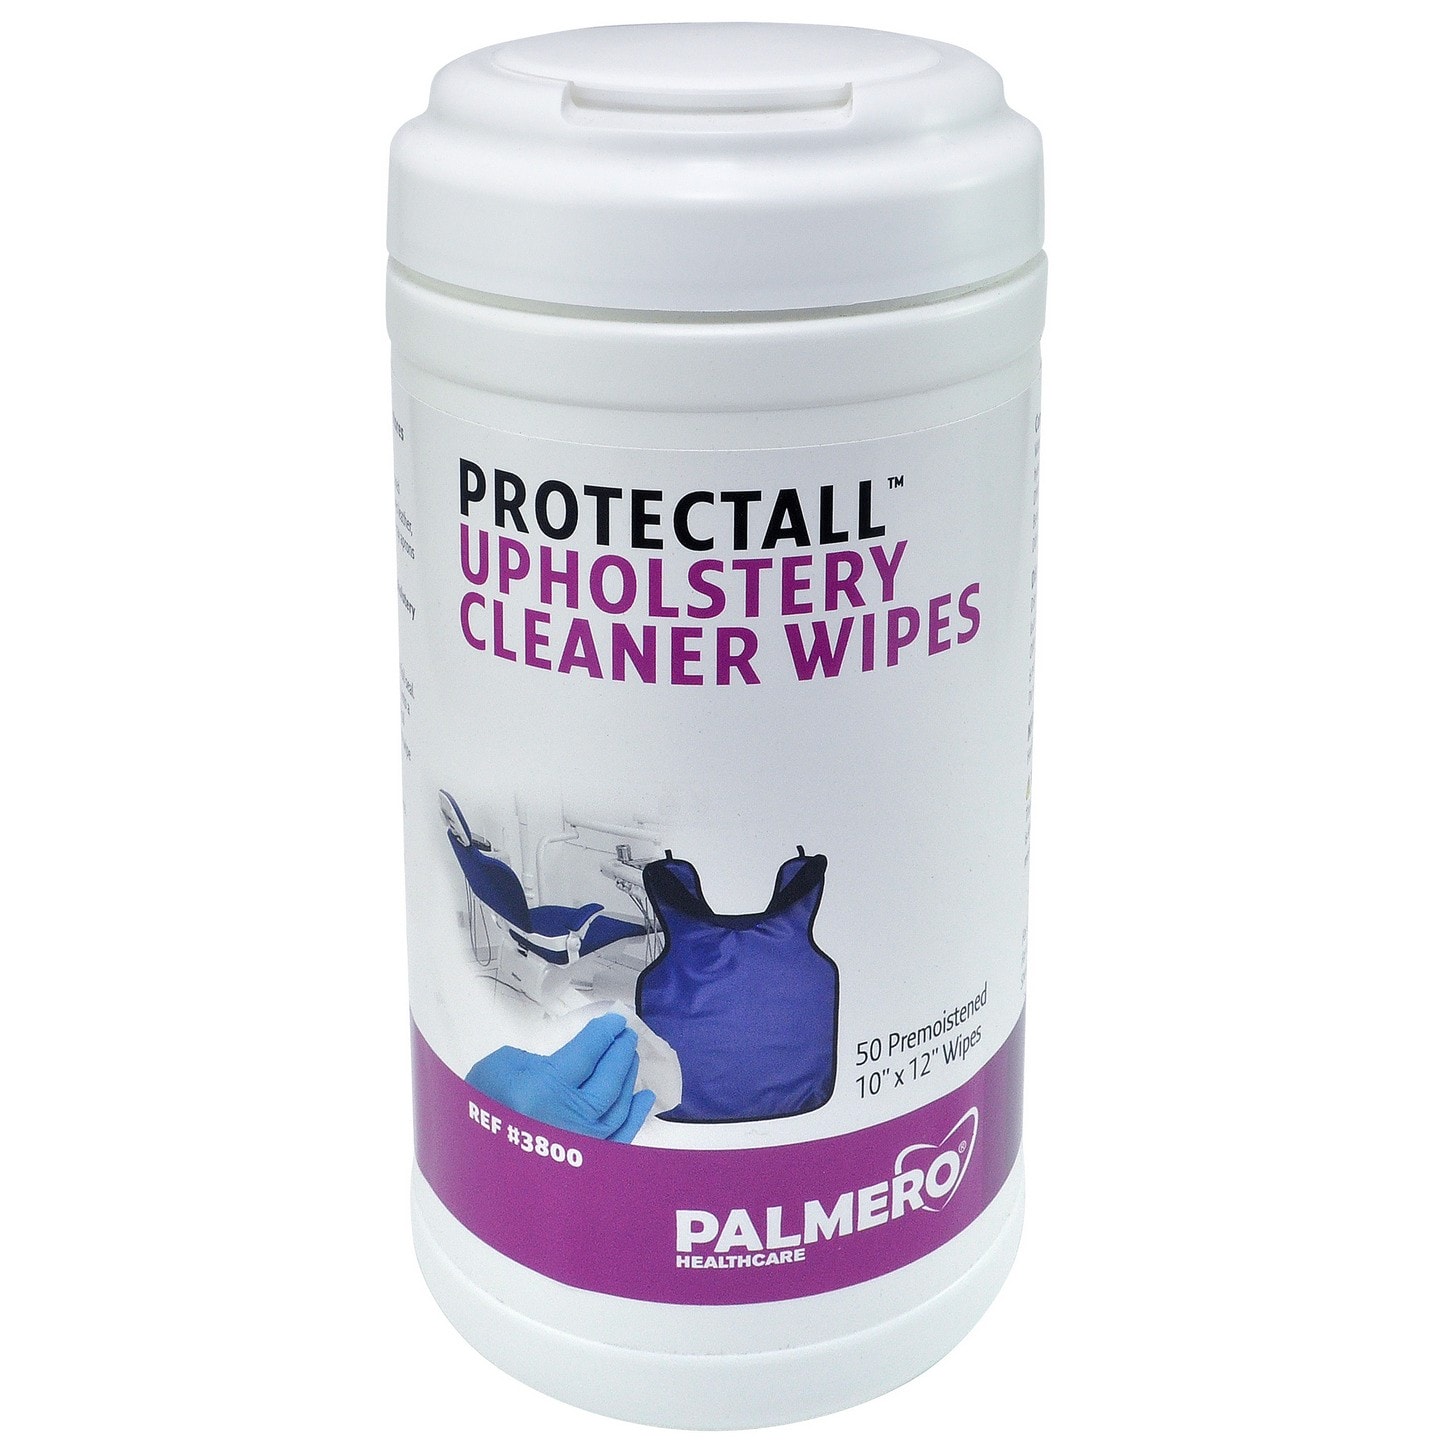 Product image of Protectall Upholstery Cleaner Wipes.